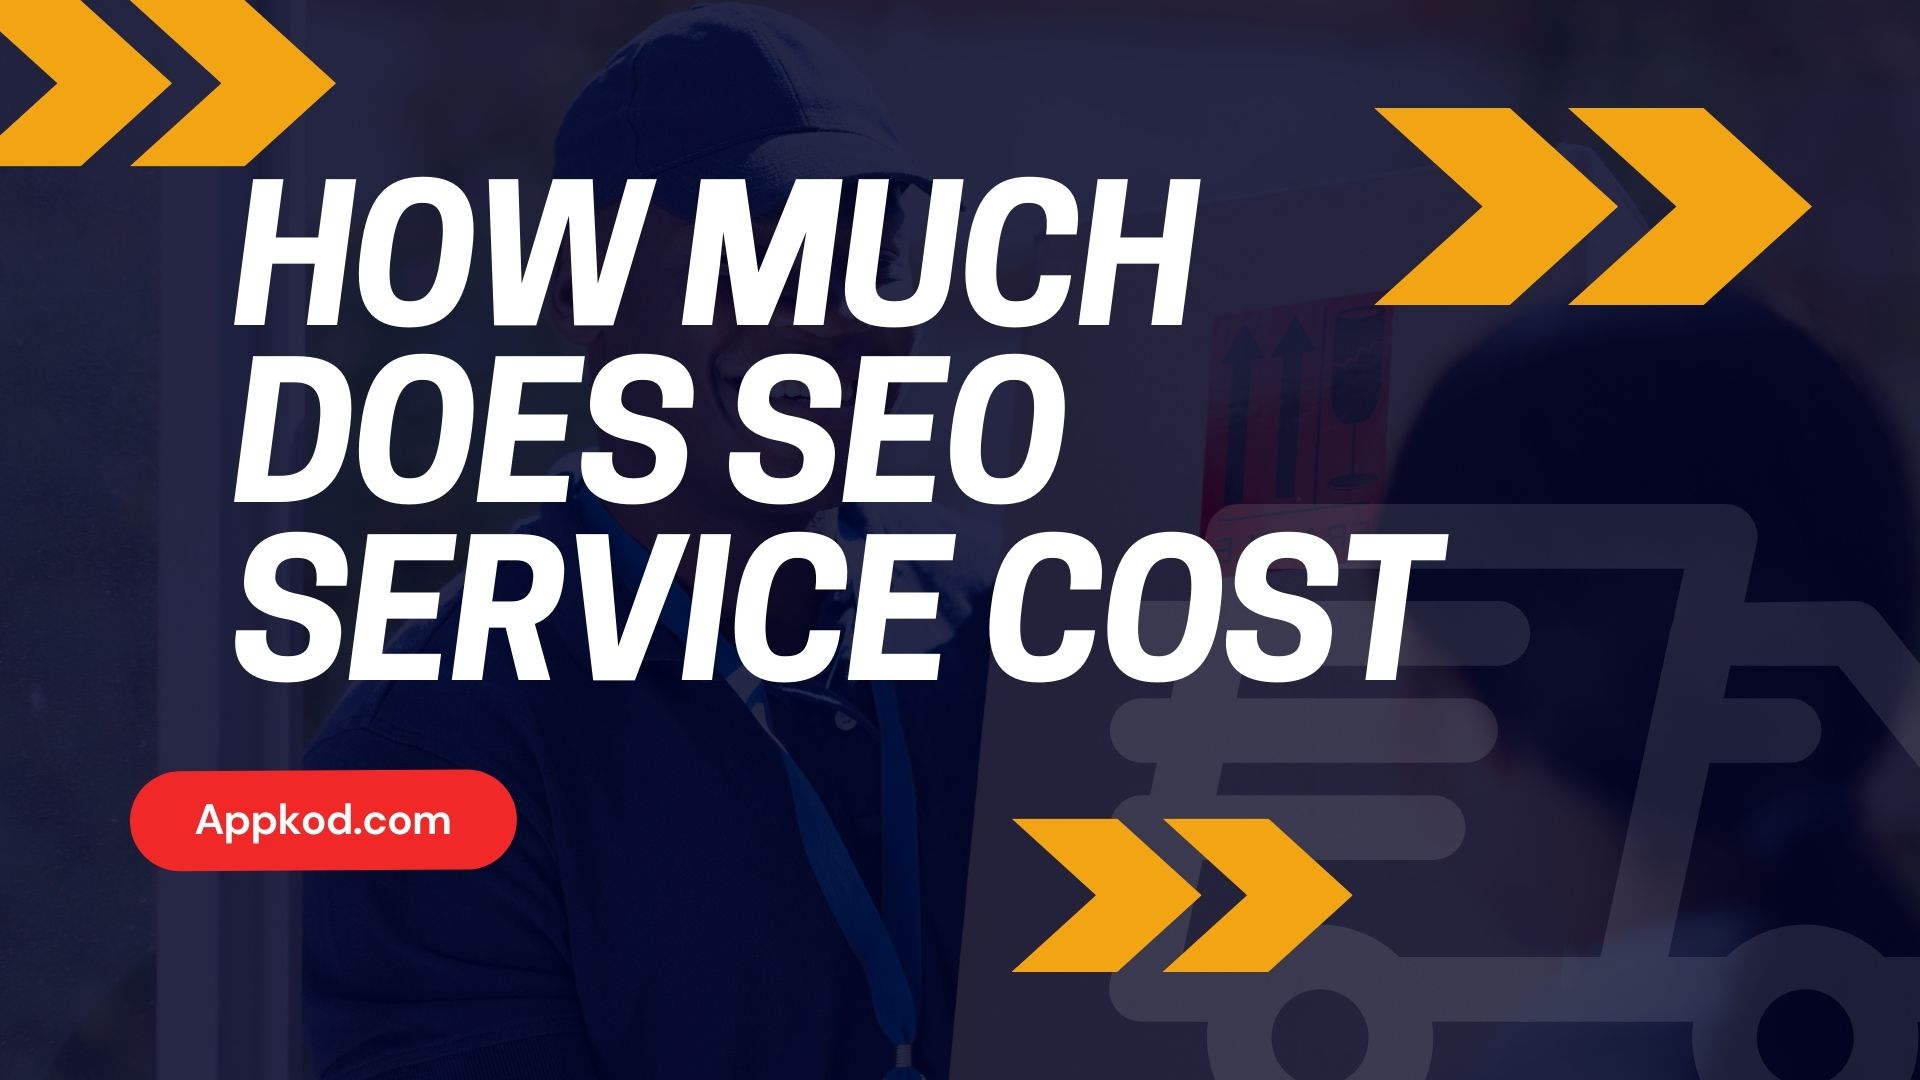 How much does SEO service cost